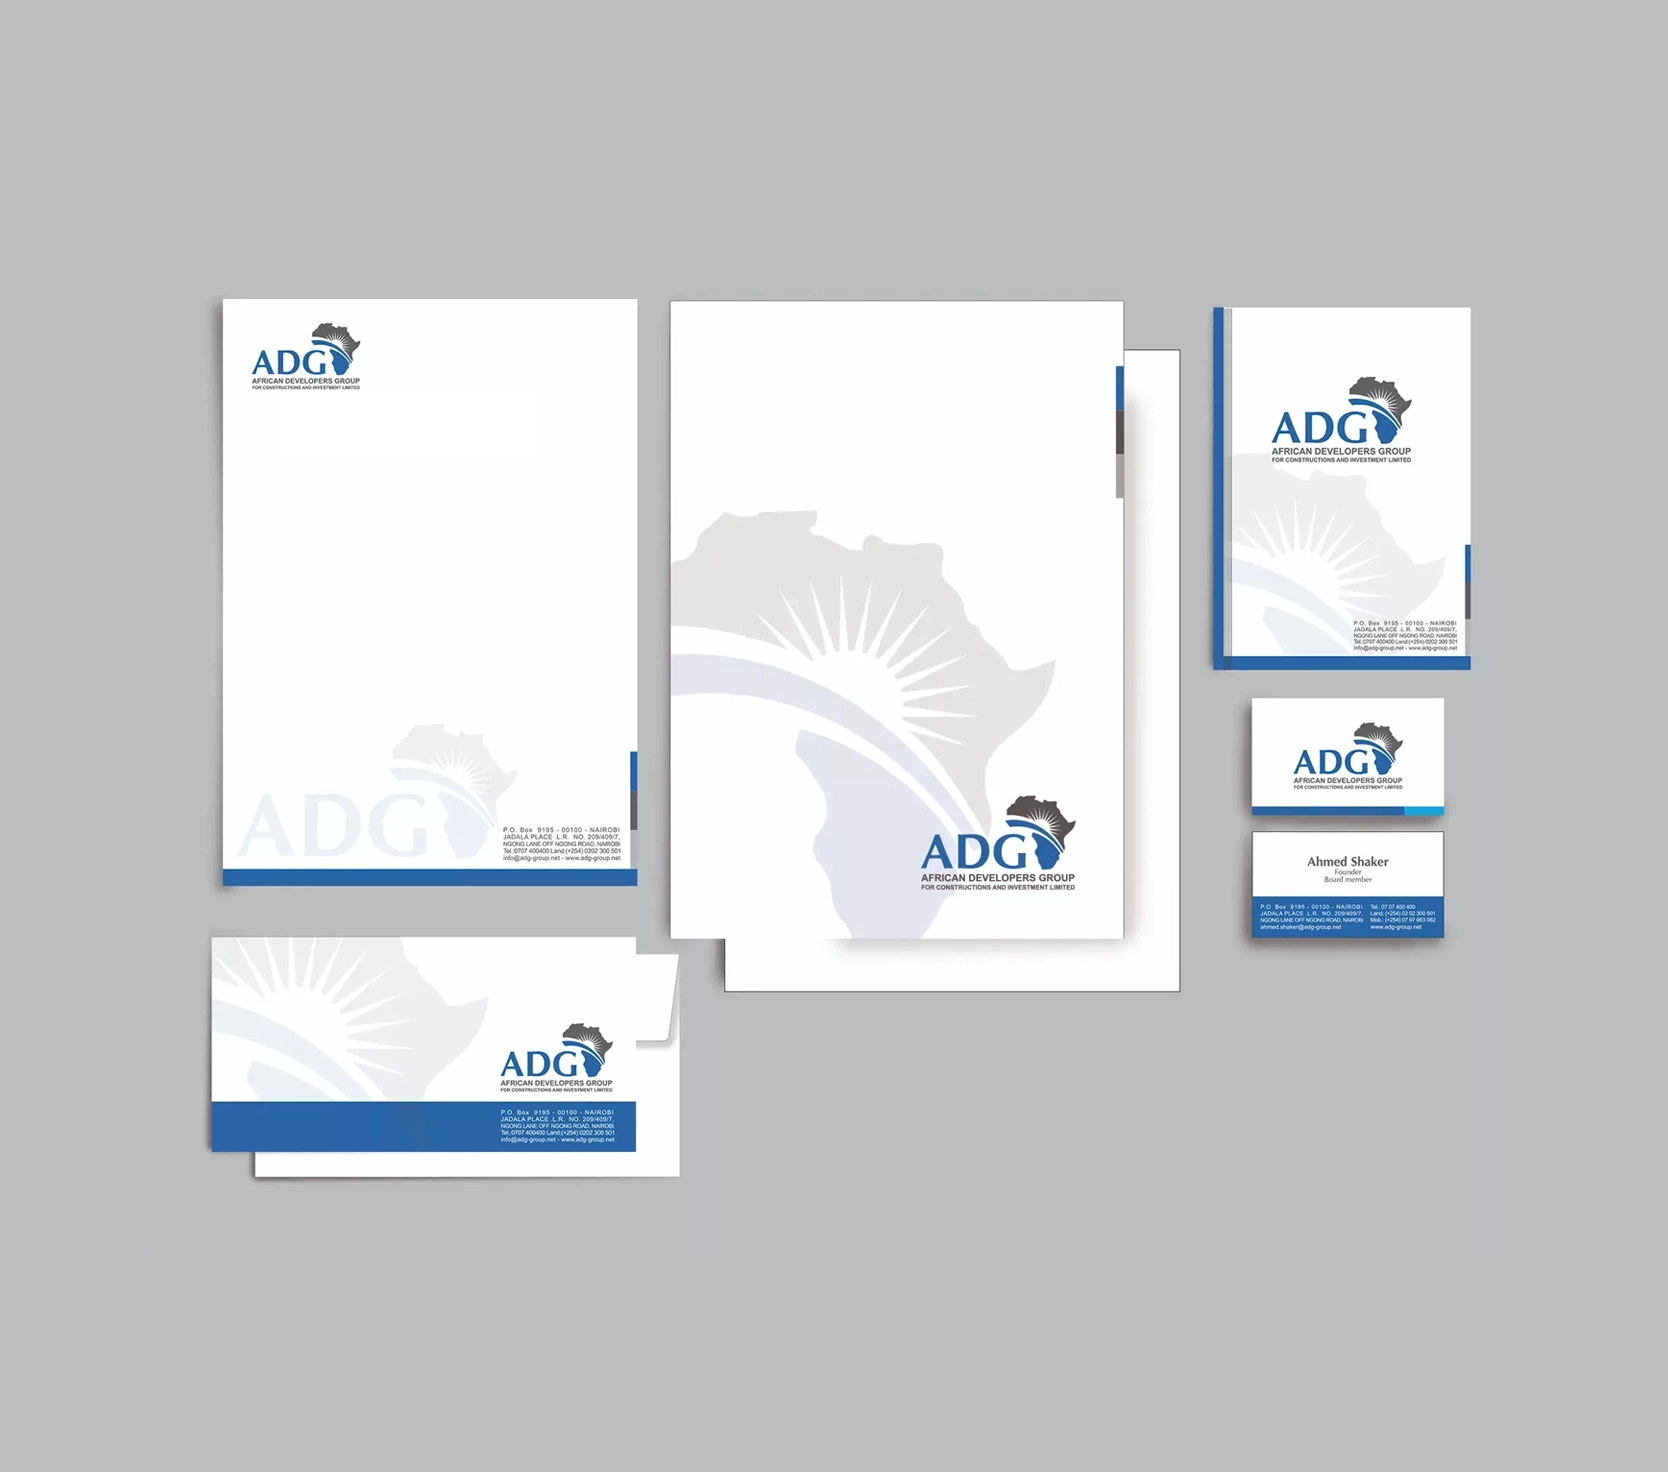 African Developers Group - ADG Corporate Identity